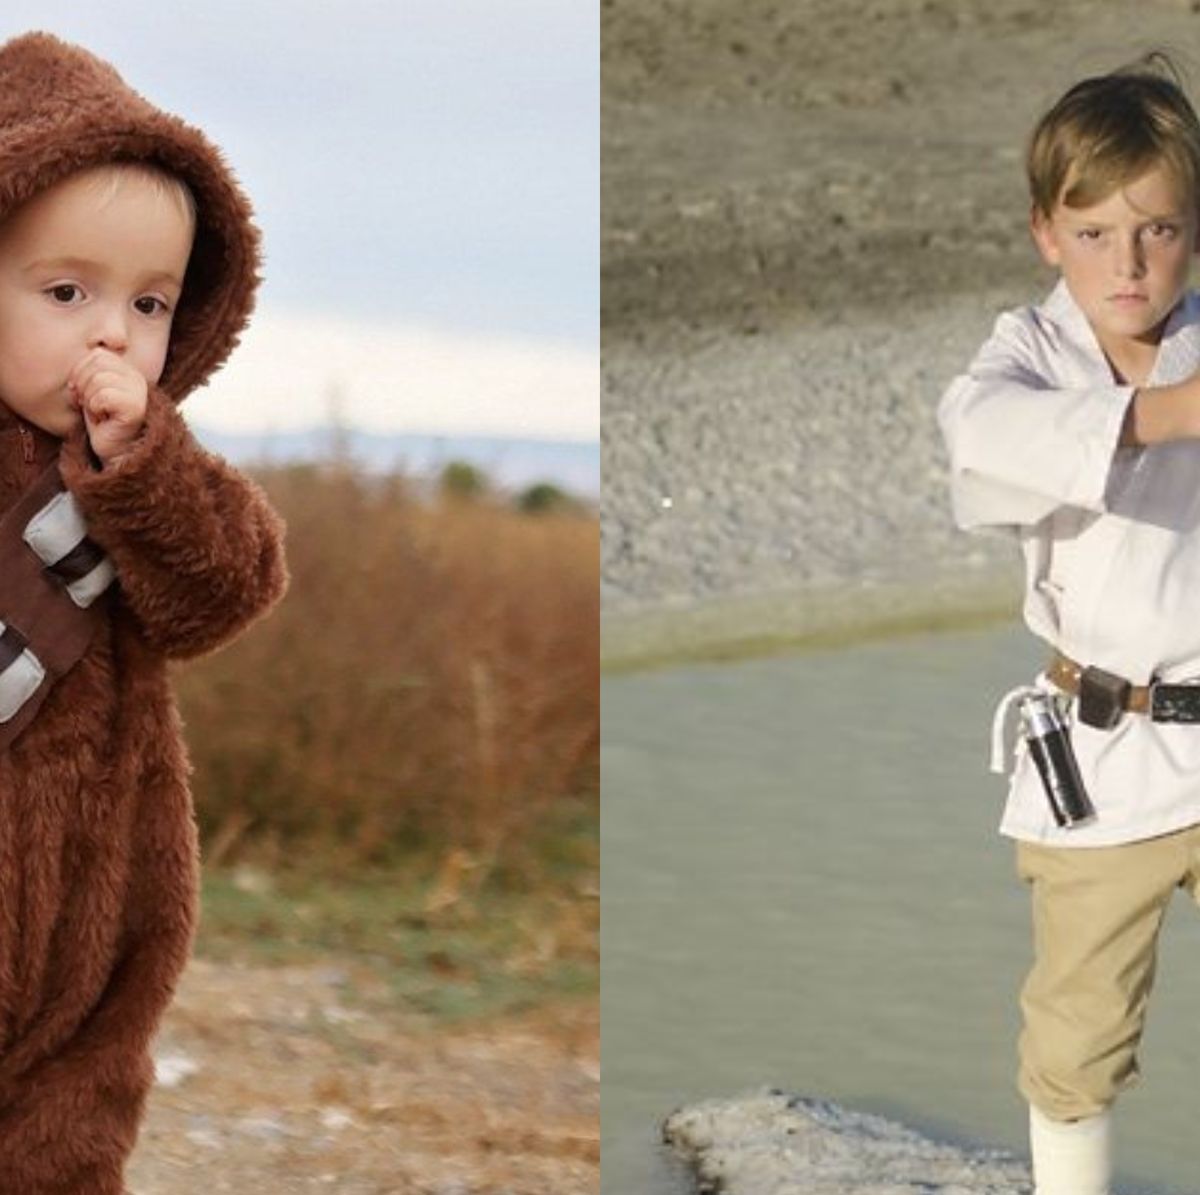 27 Star Wars Costumes - How to Make Star Wars Halloween Costumes for Kids Adults